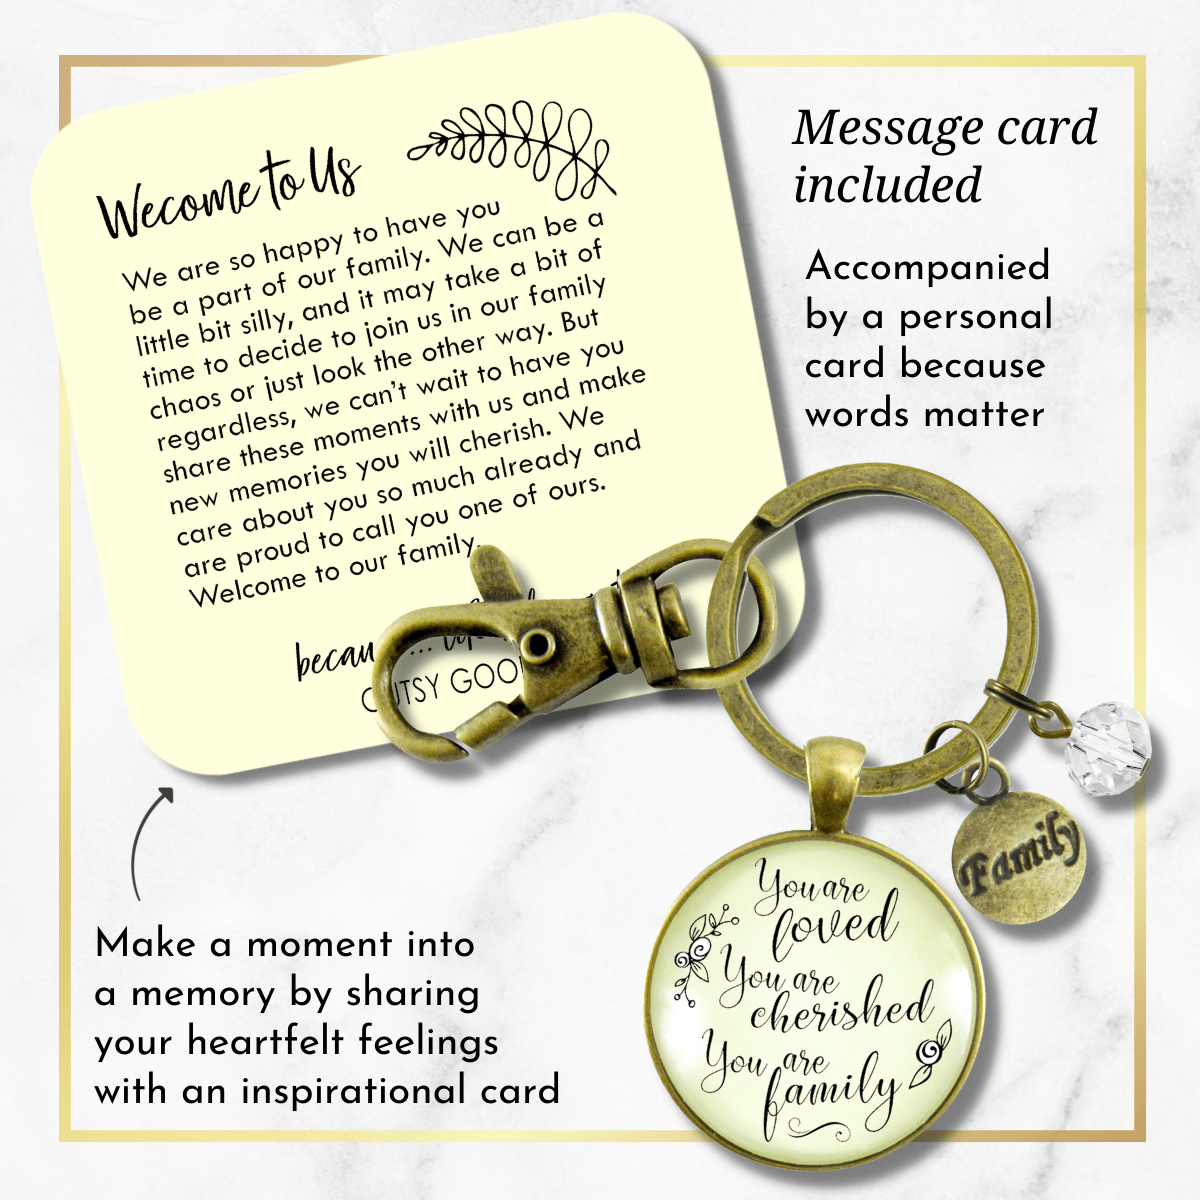 Loving Family Keychain You are Cherished Meaningful Gift Jewelry - Gutsy Goodness Handmade Jewelry;Loving Family Keychain You Are Cherished Meaningful Gift Jewelry - Gutsy Goodness Handmade Jewelry Gifts